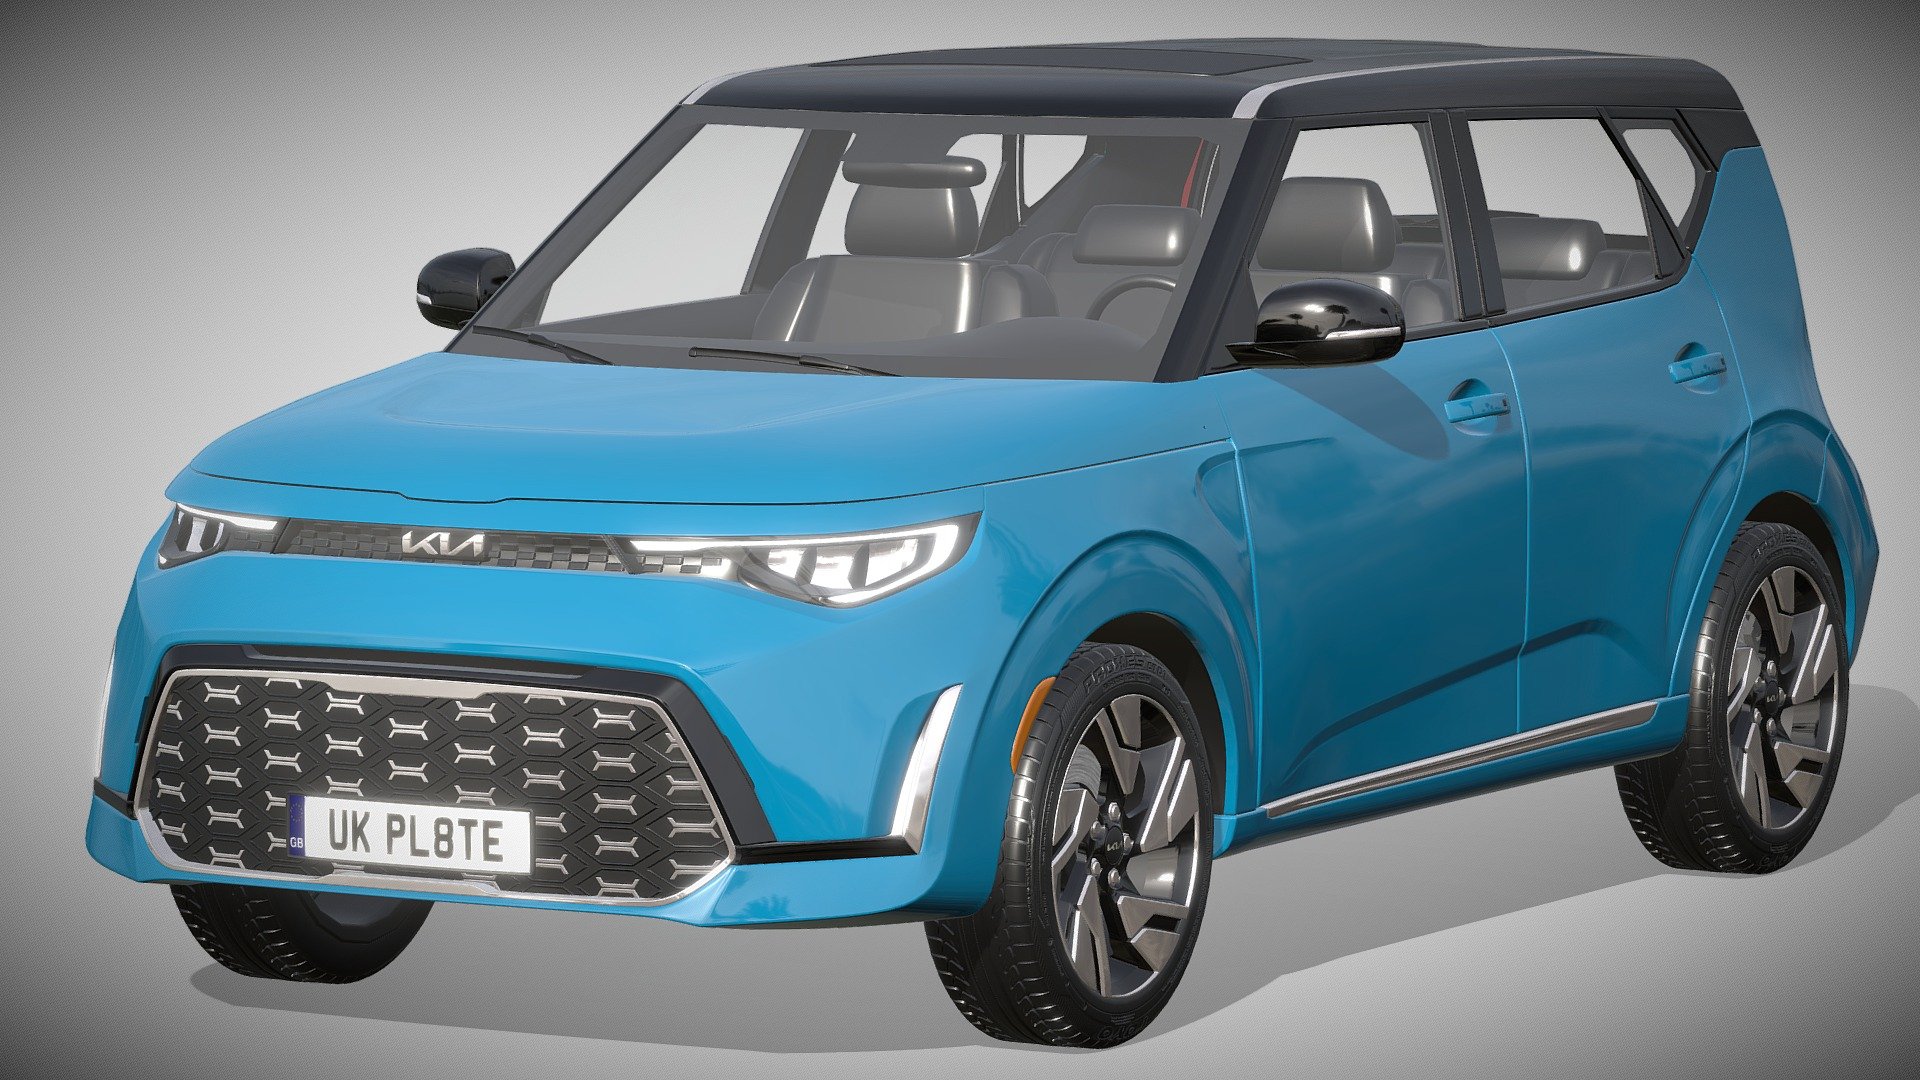 KIA SOUL 2023

https://www.kiamedia.com/us/en/media/pressreleases/18857/new-2023-kia-soul-debuts

Clean geometry Light weight model, yet completely detailed for HI-Res renders. Use for movies, Advertisements or games

Corona render and materials

All textures include in *.rar files

Lighting setup is not included in the file! - KIA SOUL 2023 - Buy Royalty Free 3D model by zifir3d 3d model